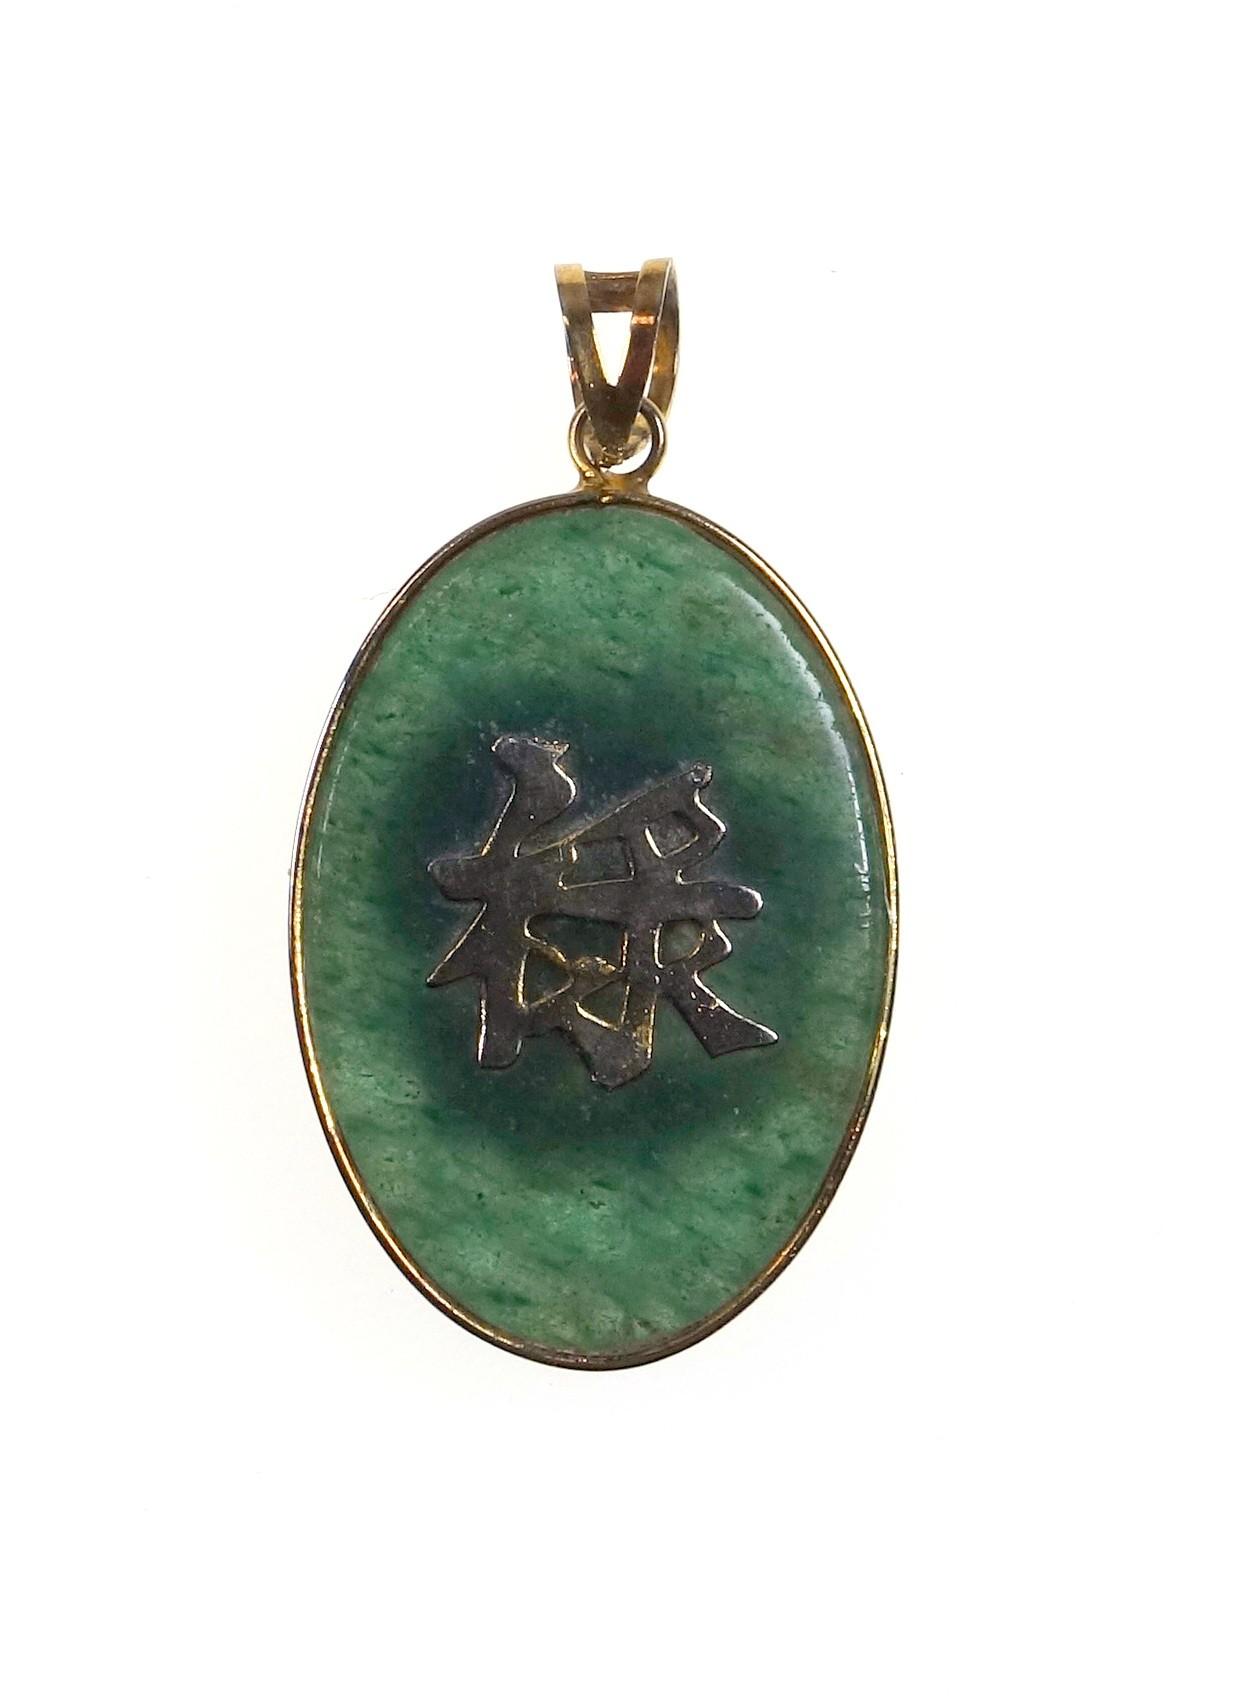 Moss agate bead necklace, a ring of green aventurine quartz, similar pendant with dragon and two - Image 3 of 5